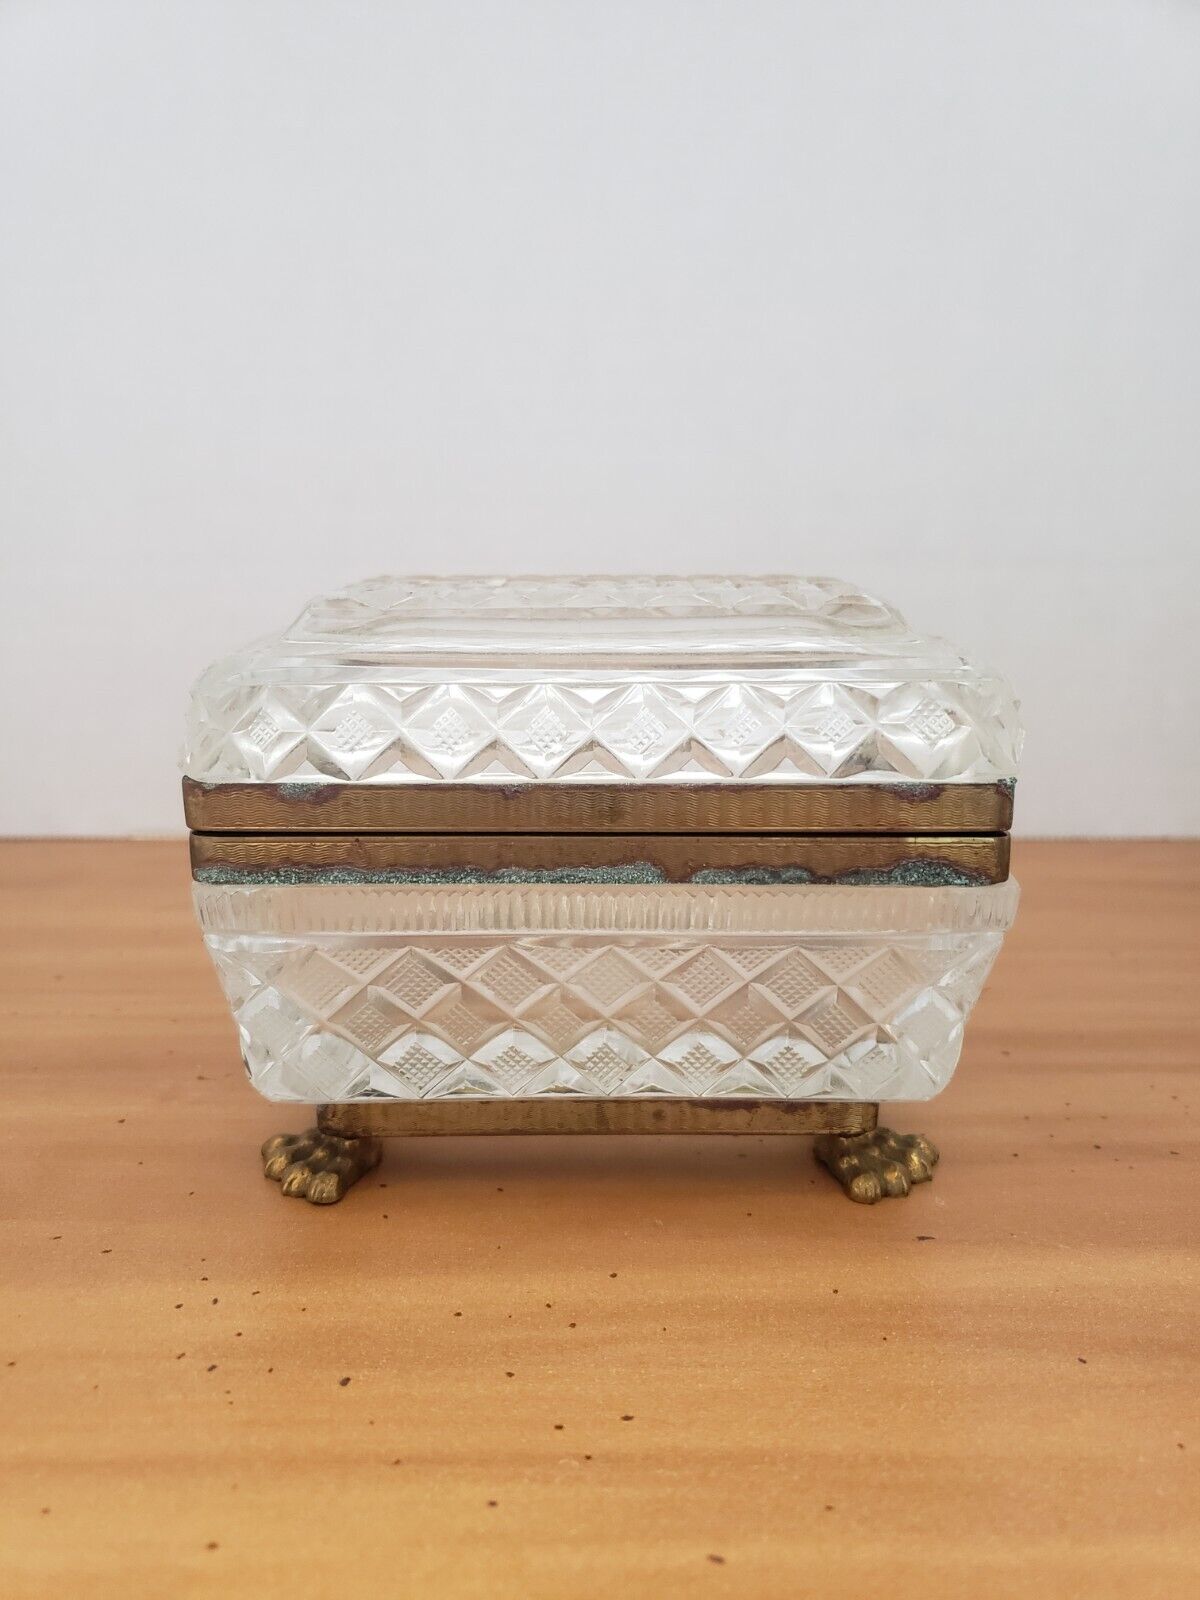 Antique French Crystal Casket Trinket Jewelry Glass Box Hinged Lid Guilded Mount